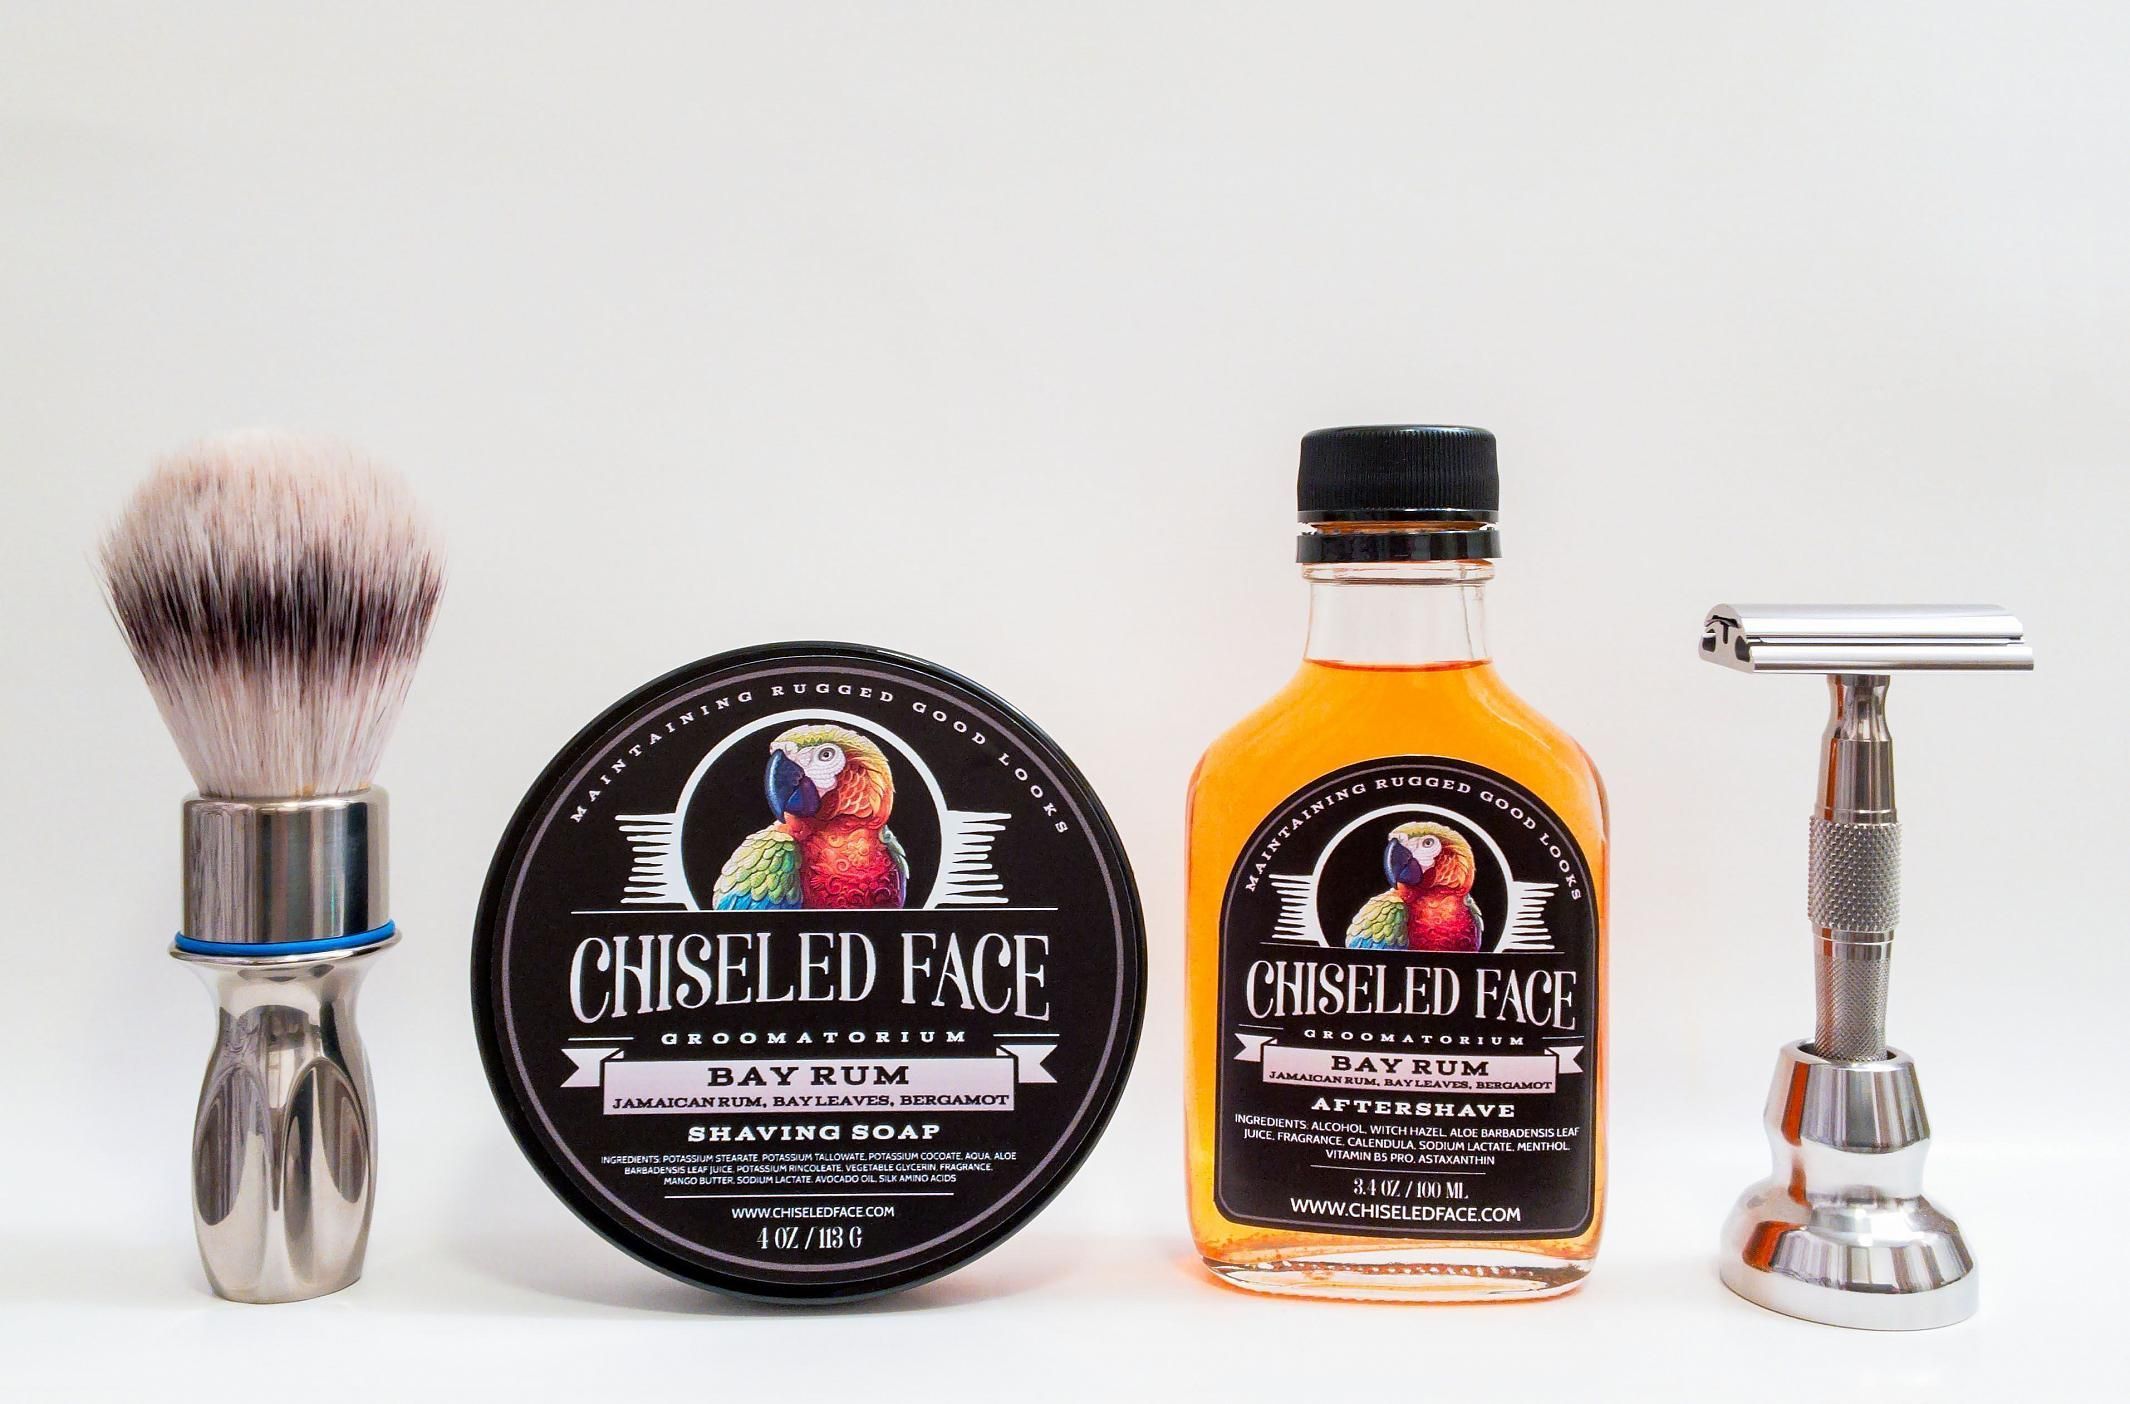 Chiseled Face "Bay Rum"